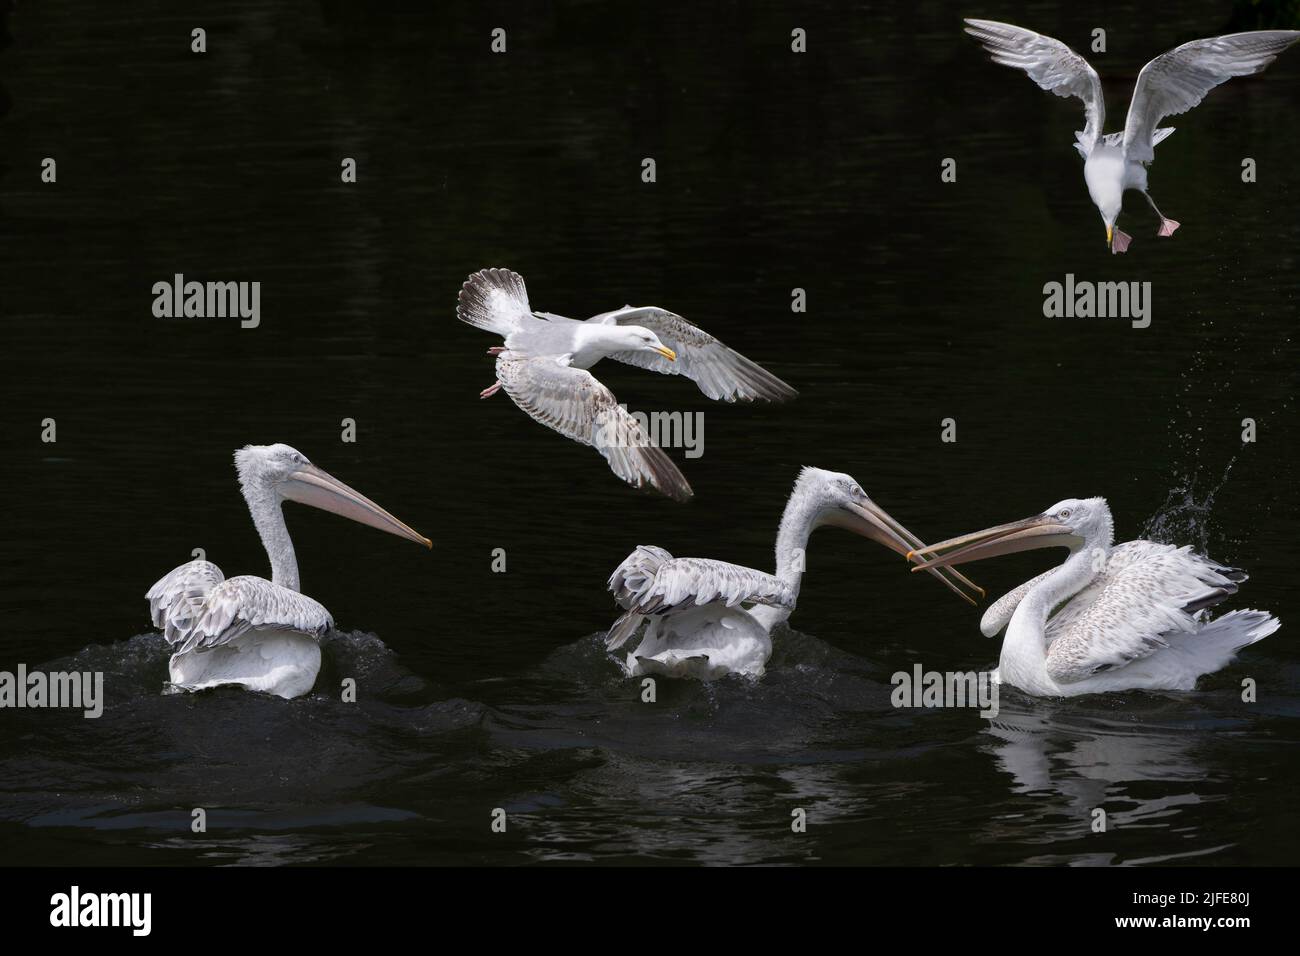 Dalmatian pelicans and gulls fighting over food being fed to the pelicans at Wildfowl and Wetlands at Arundel in West Sussex. Stock Photo